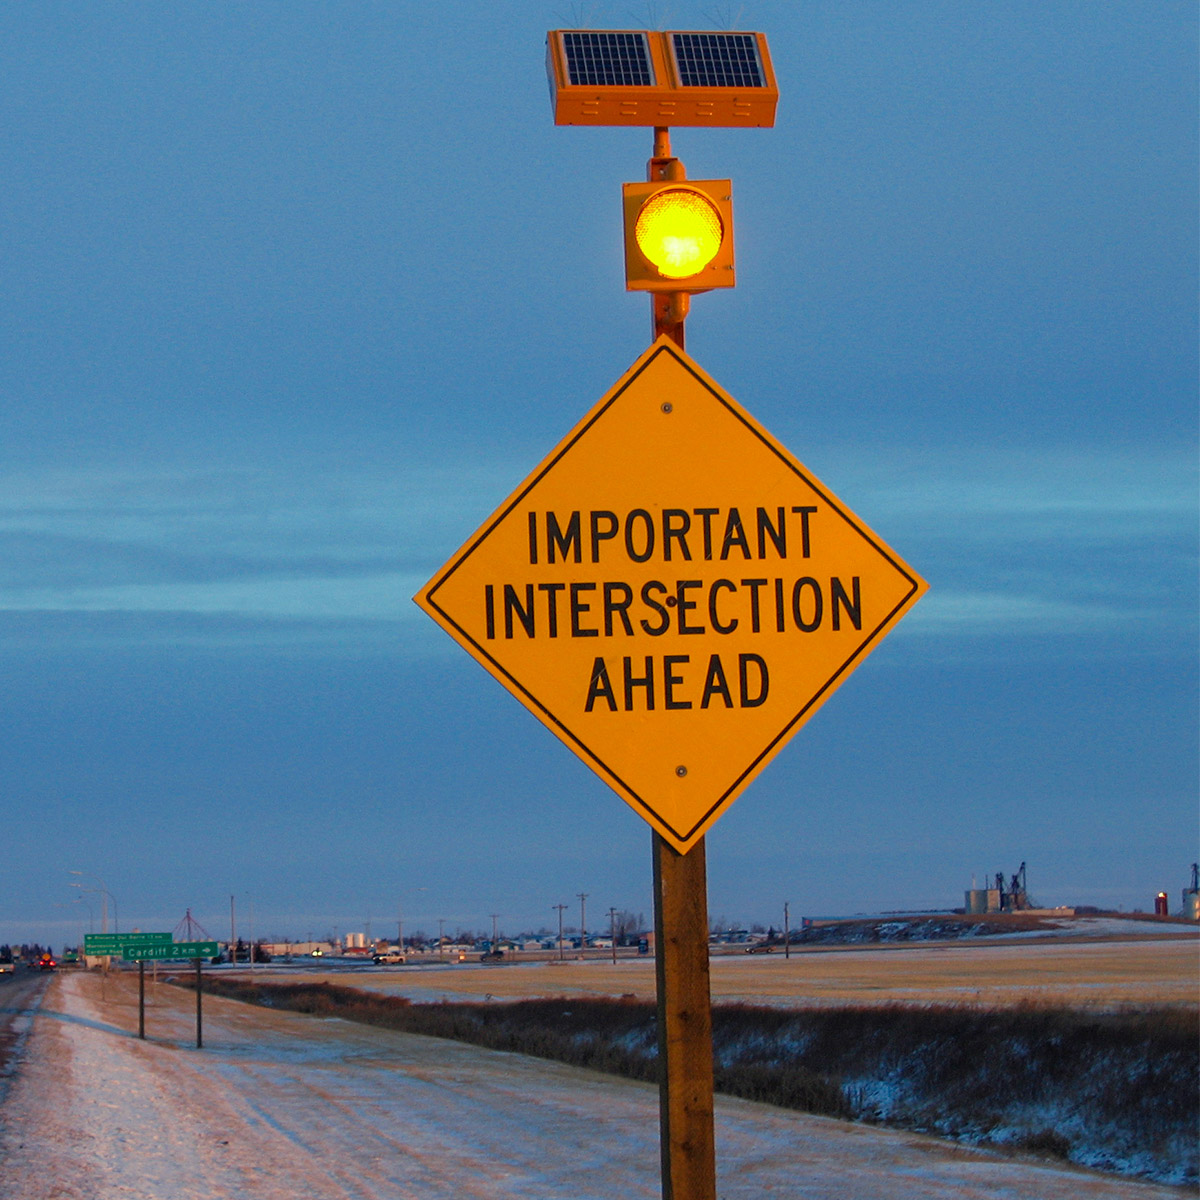 solar-powered warning sign beacon on important intersection ahead sign